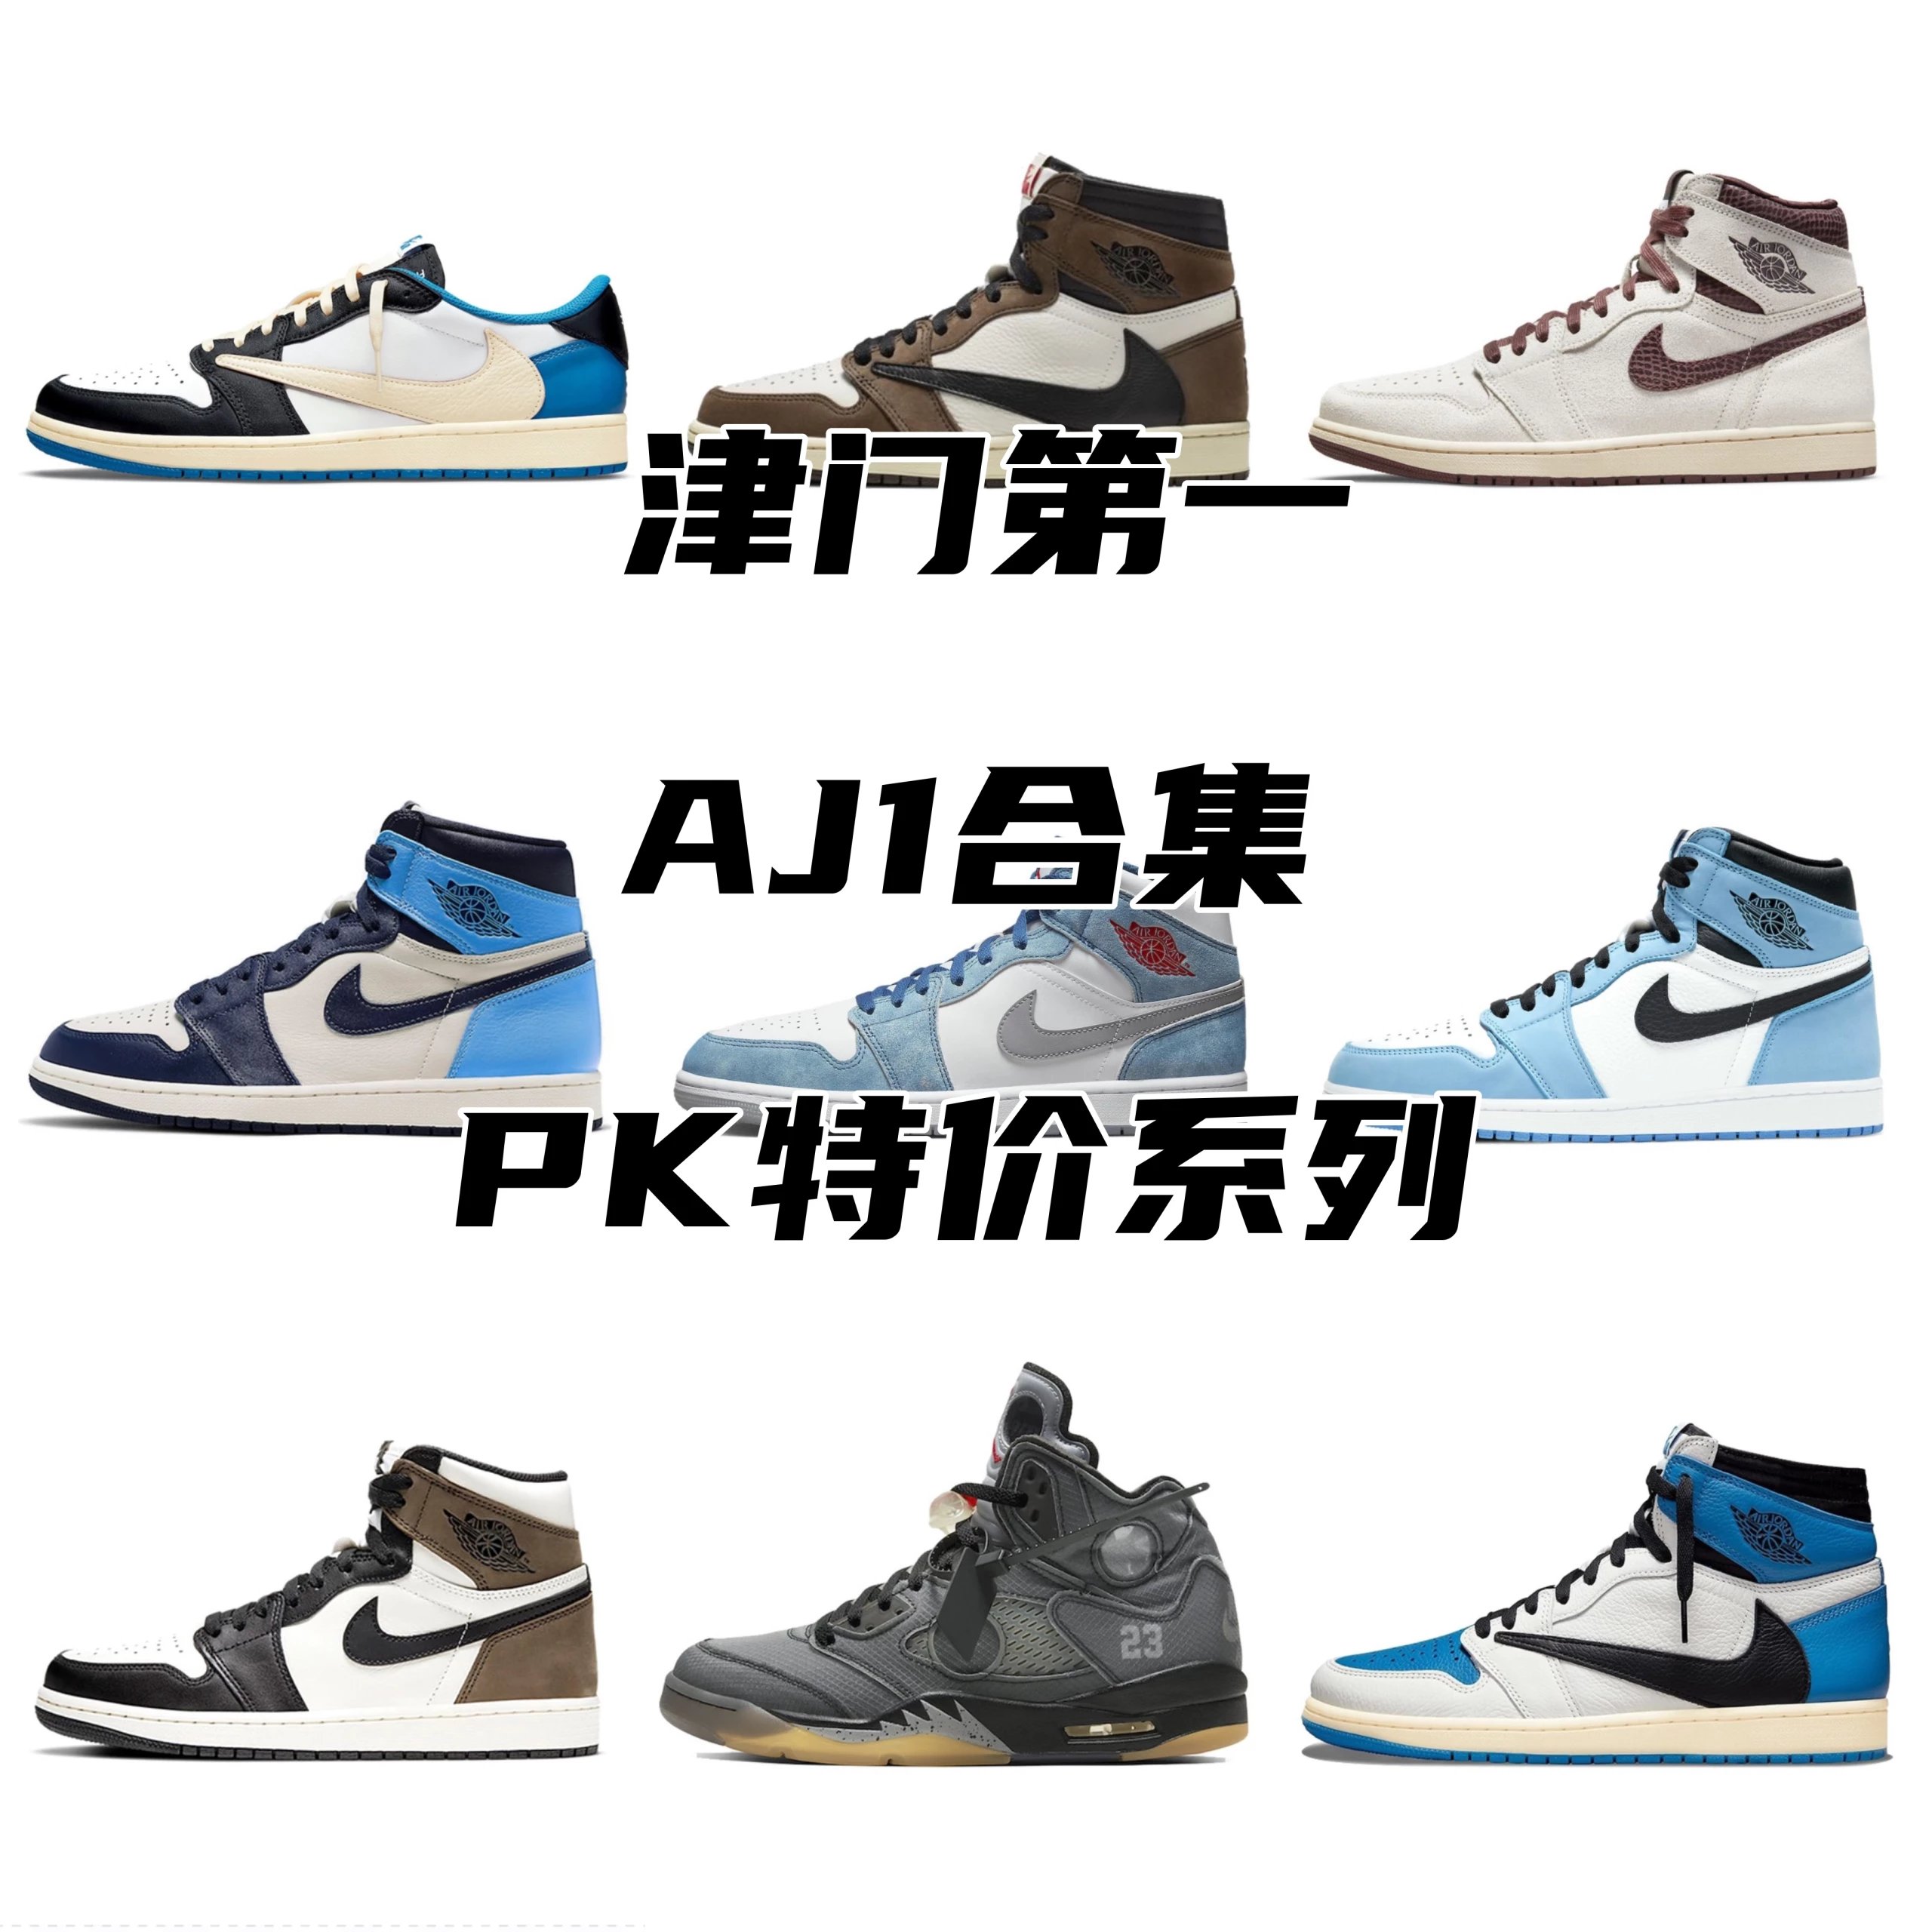 Item Thumbnail for 【Special price without after-sales】Double 11 top benefits! PK pure original special series AJ1/AJ5 collection